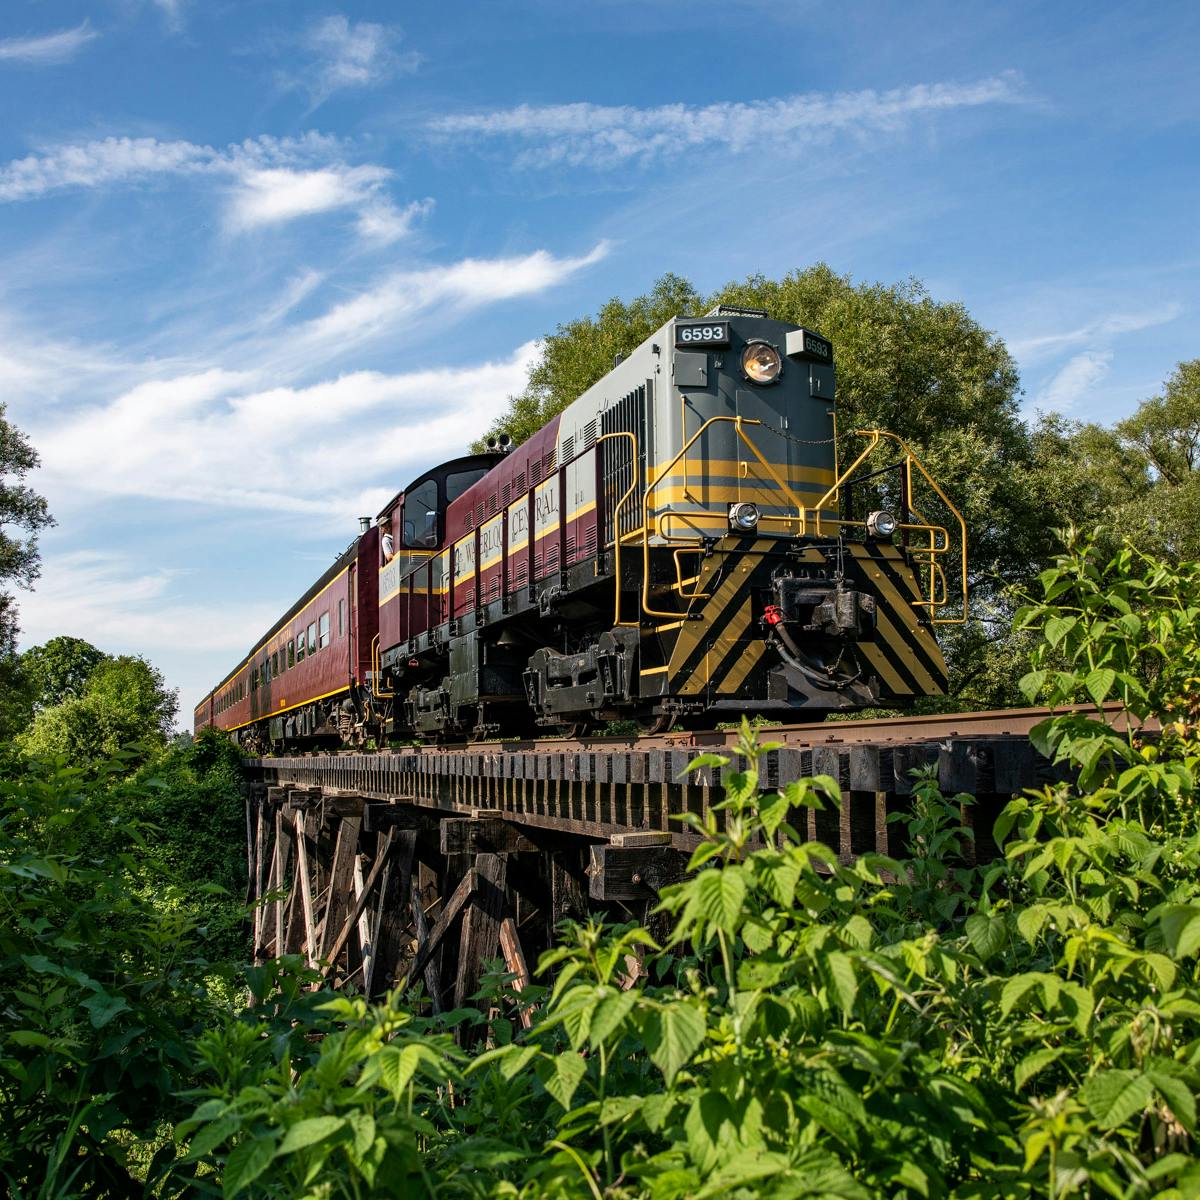 a large long train on a train track with trees in the background